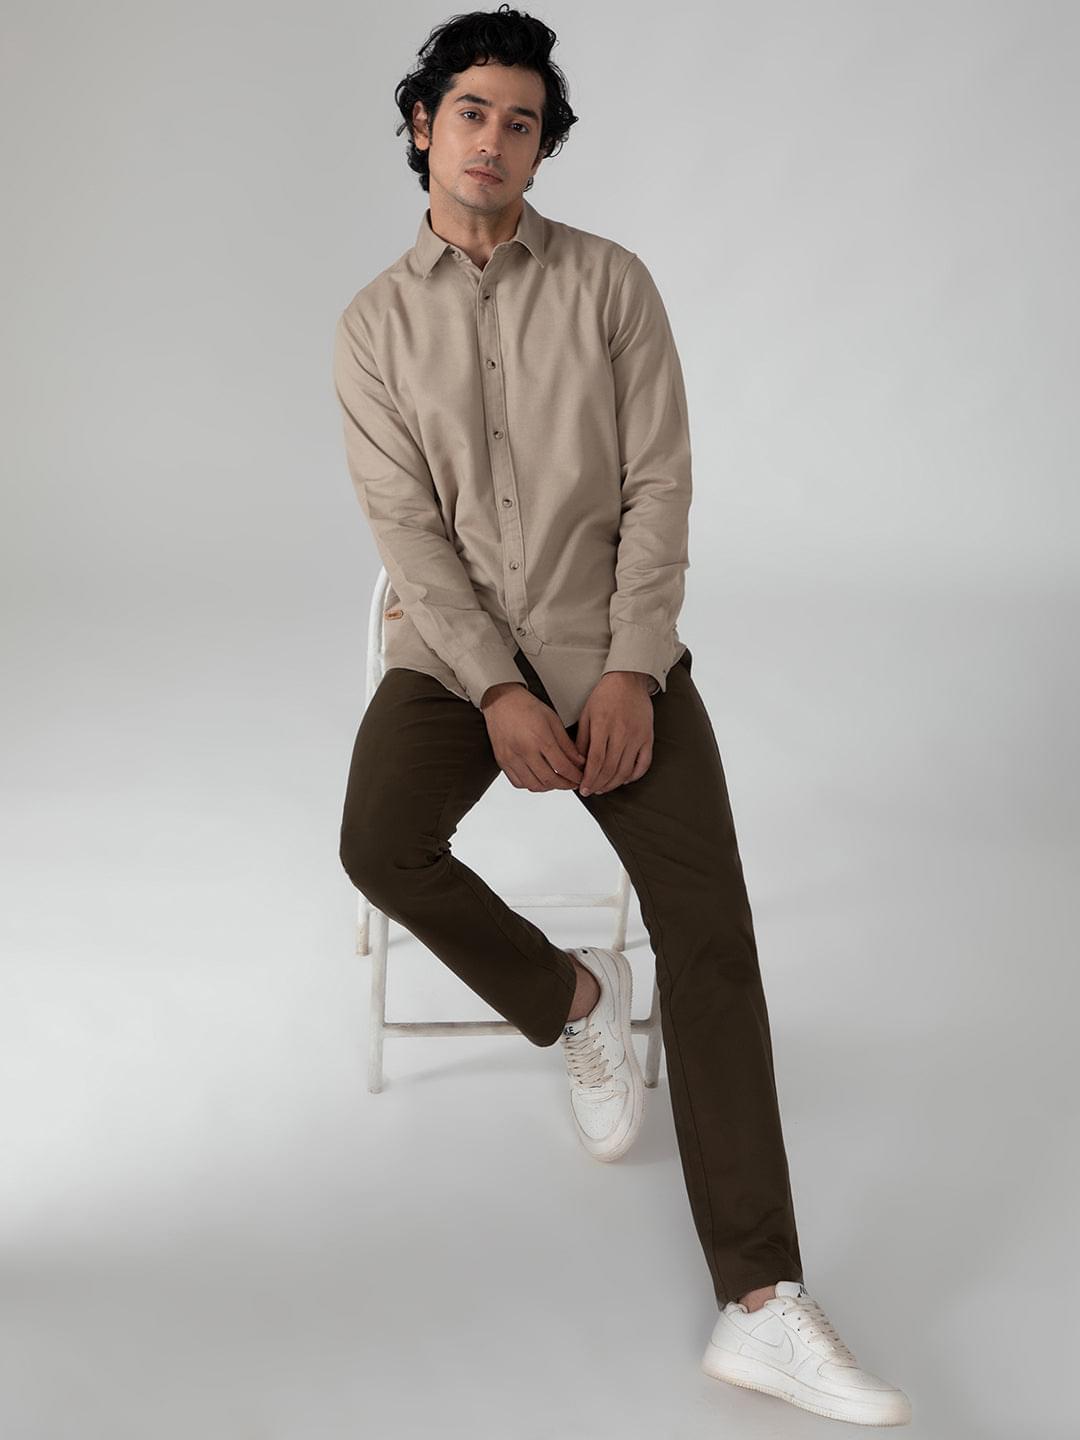 All Day Casual Cotton Linen Shirt in Khaki- Comfort Fit